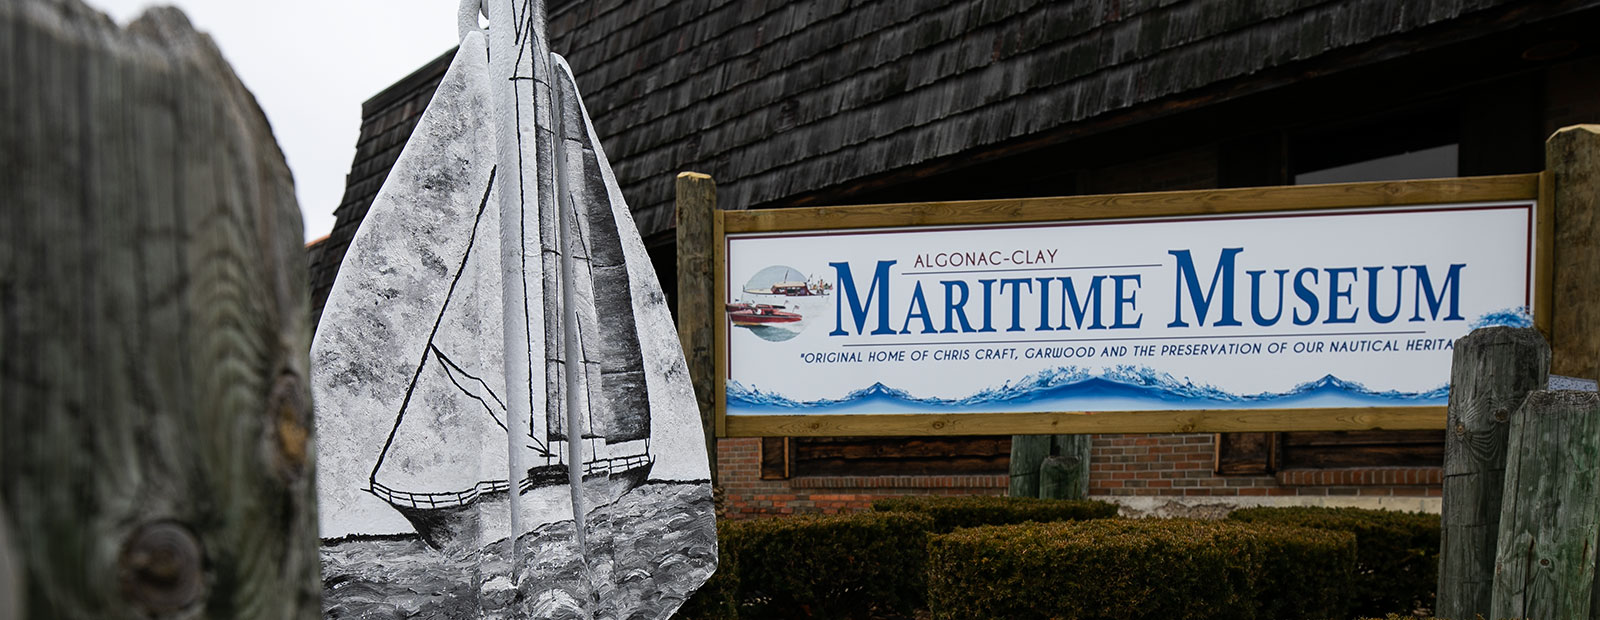 The Maritime Museum draws visitors who love learning about history of boats and waterways.